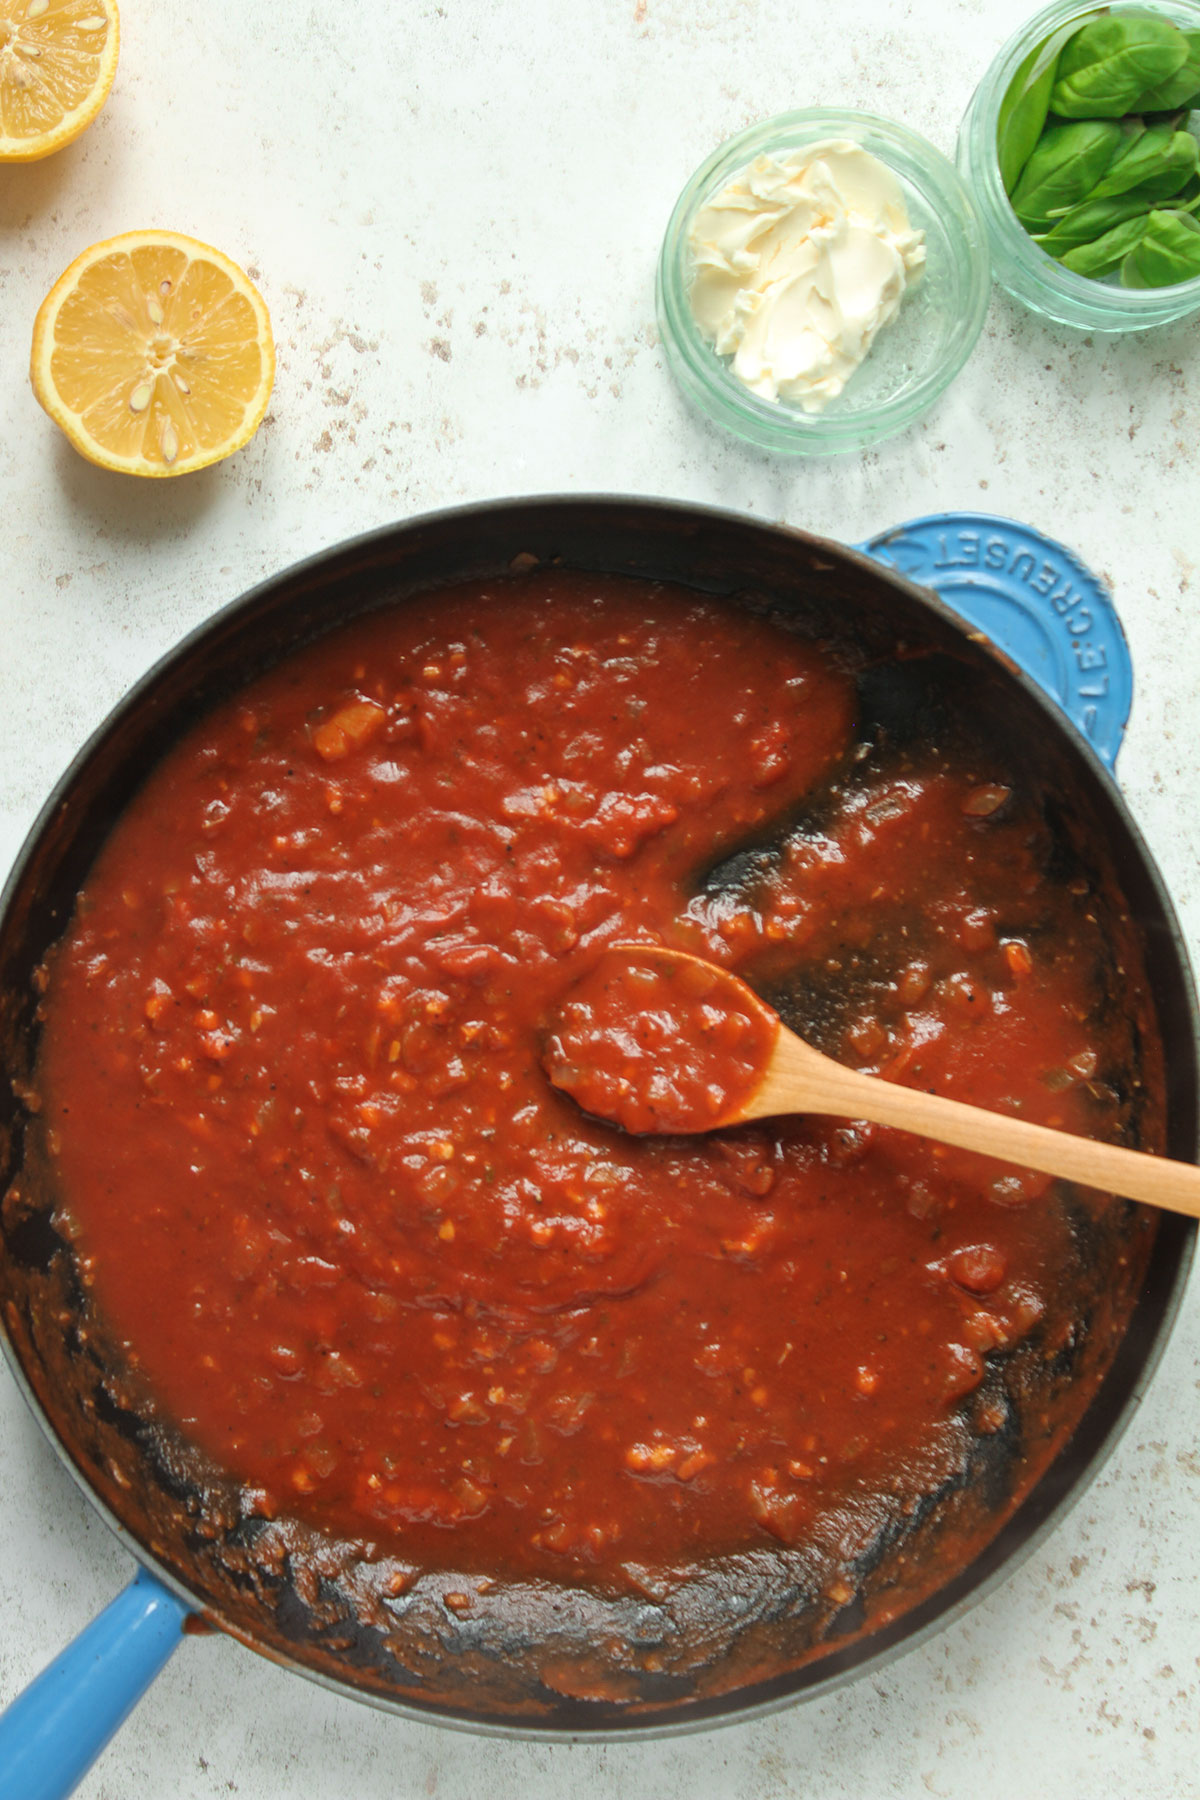 The seasoned passata sauce in a frying pan on a white background and half a lemon, a jar of mascarpone and a jar of basil leaves.